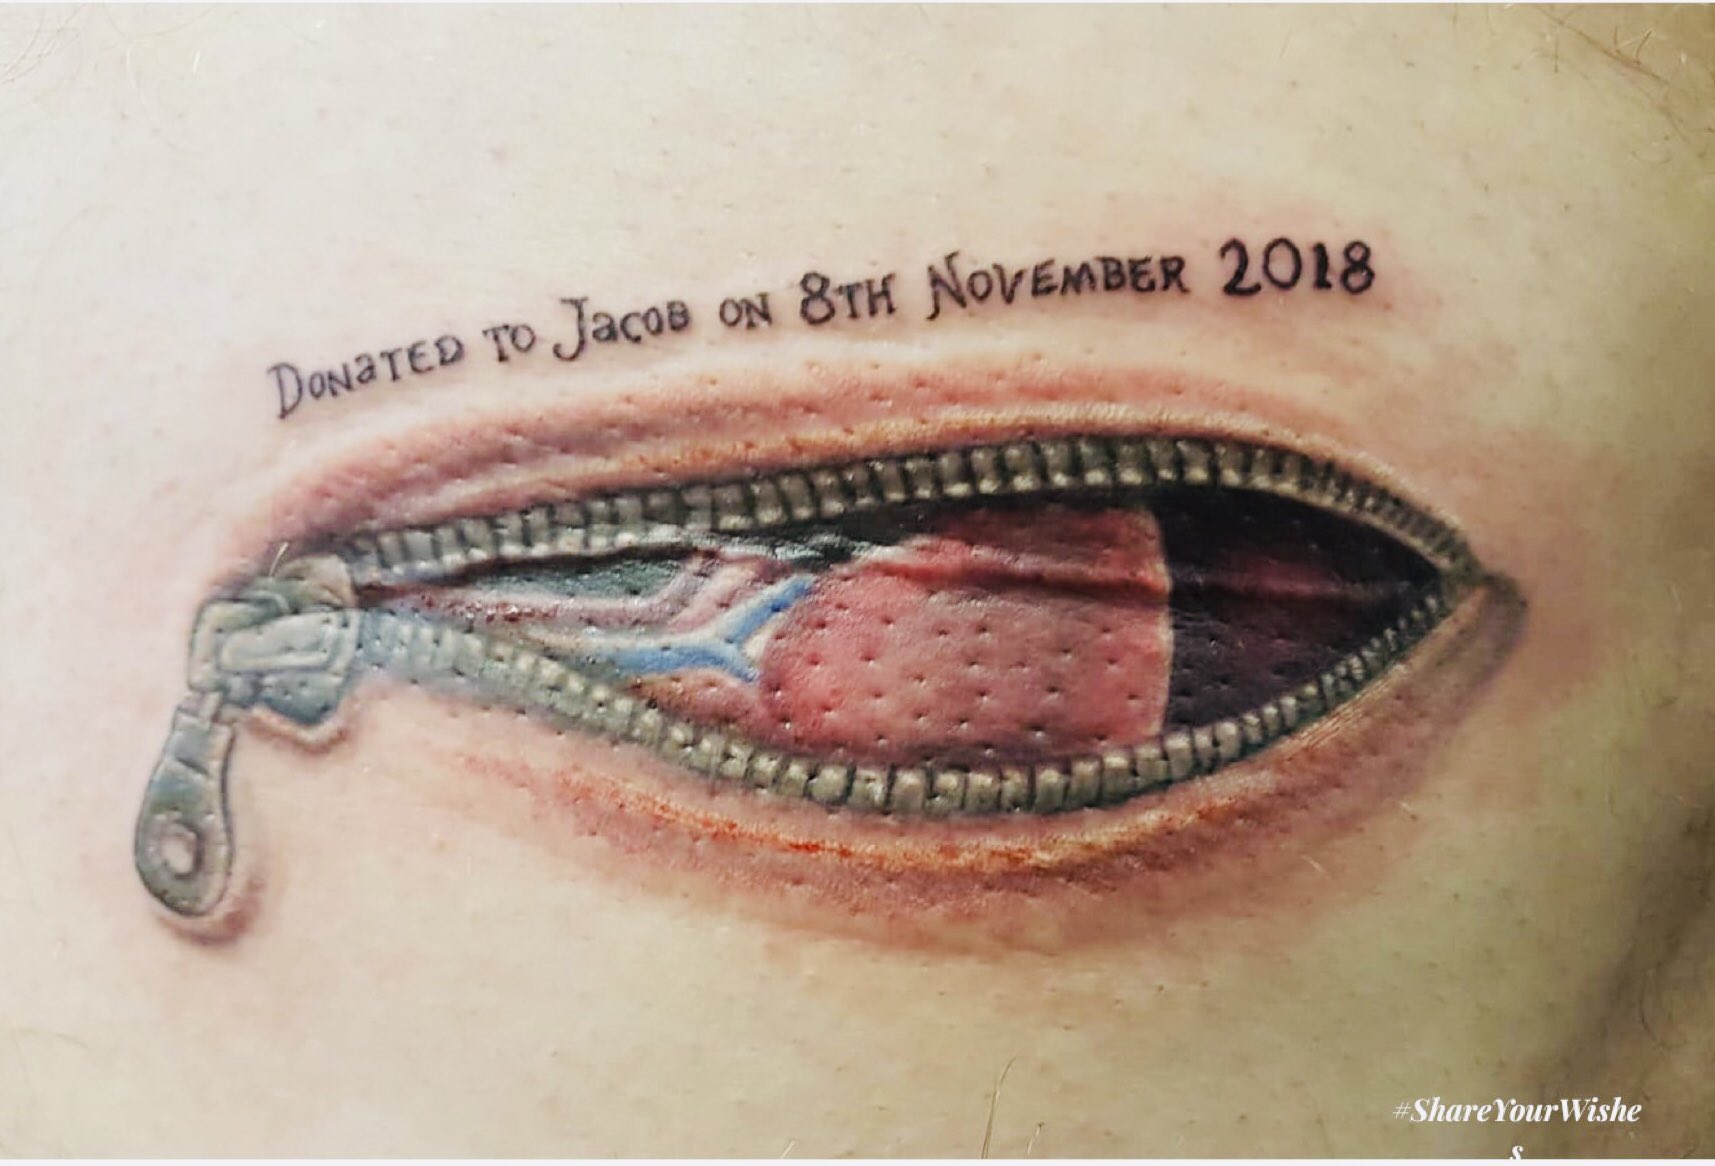 Grantham doctor gets inked up to raise awareness of organ donation